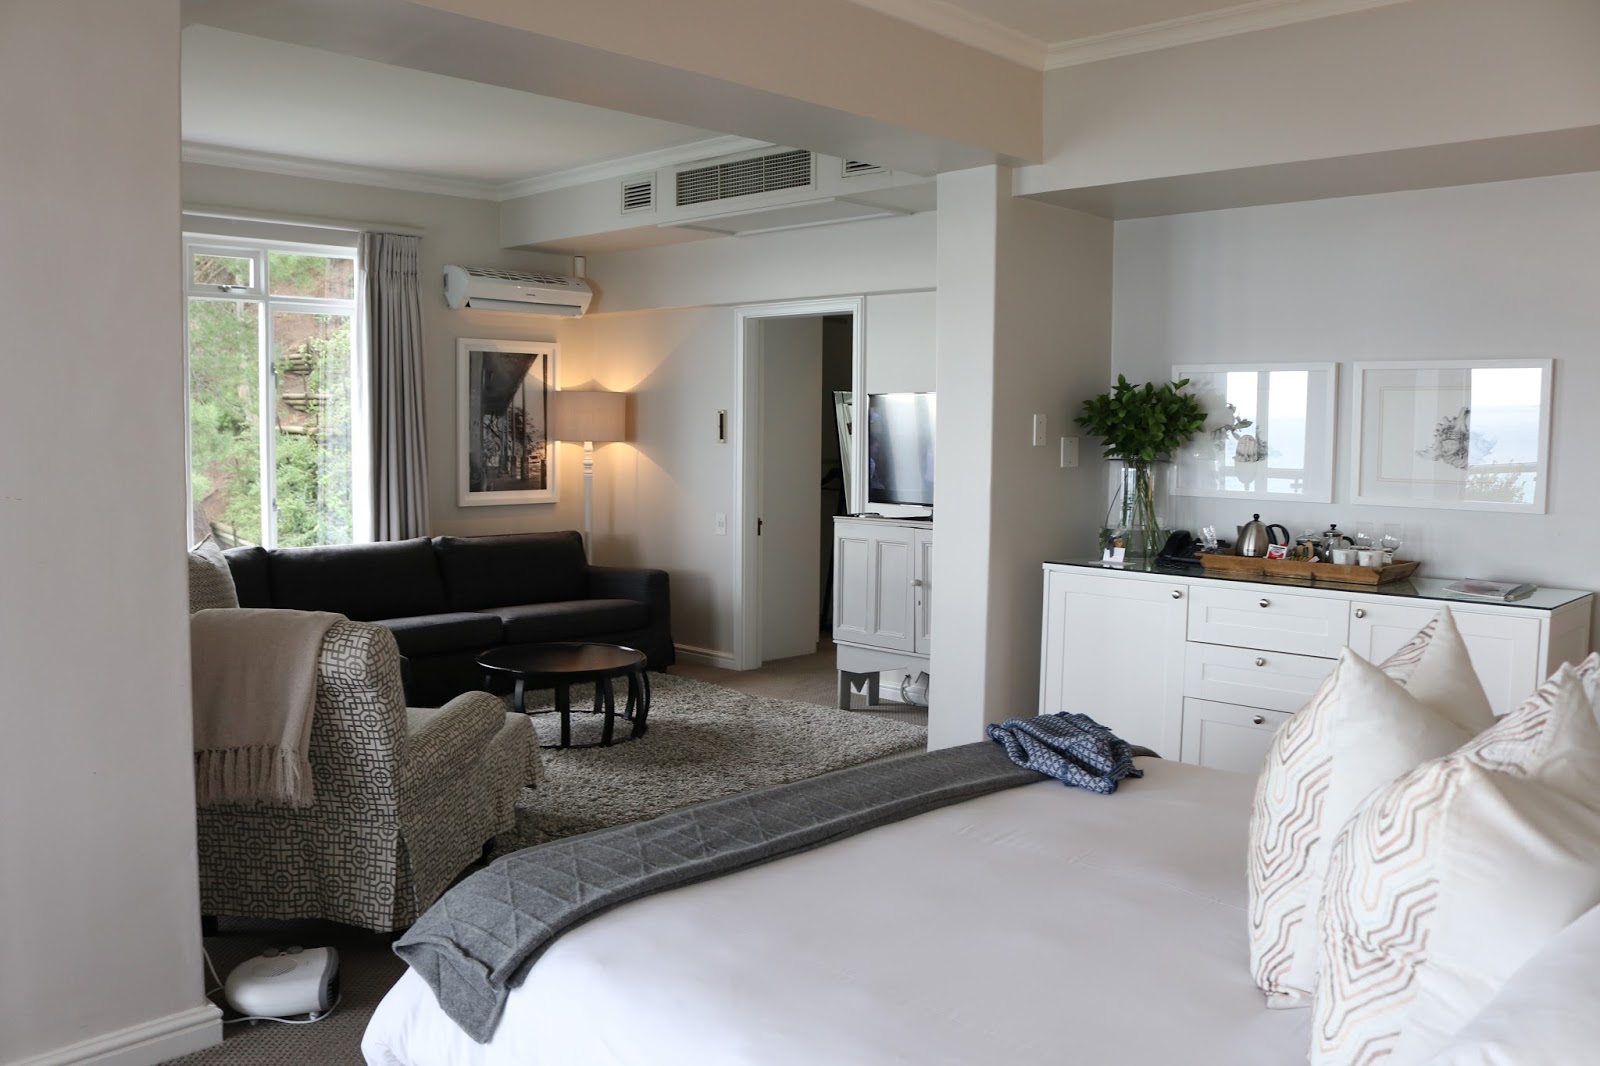 Deluxe Suite, Cape View Clifton, Cape Town, South Africa